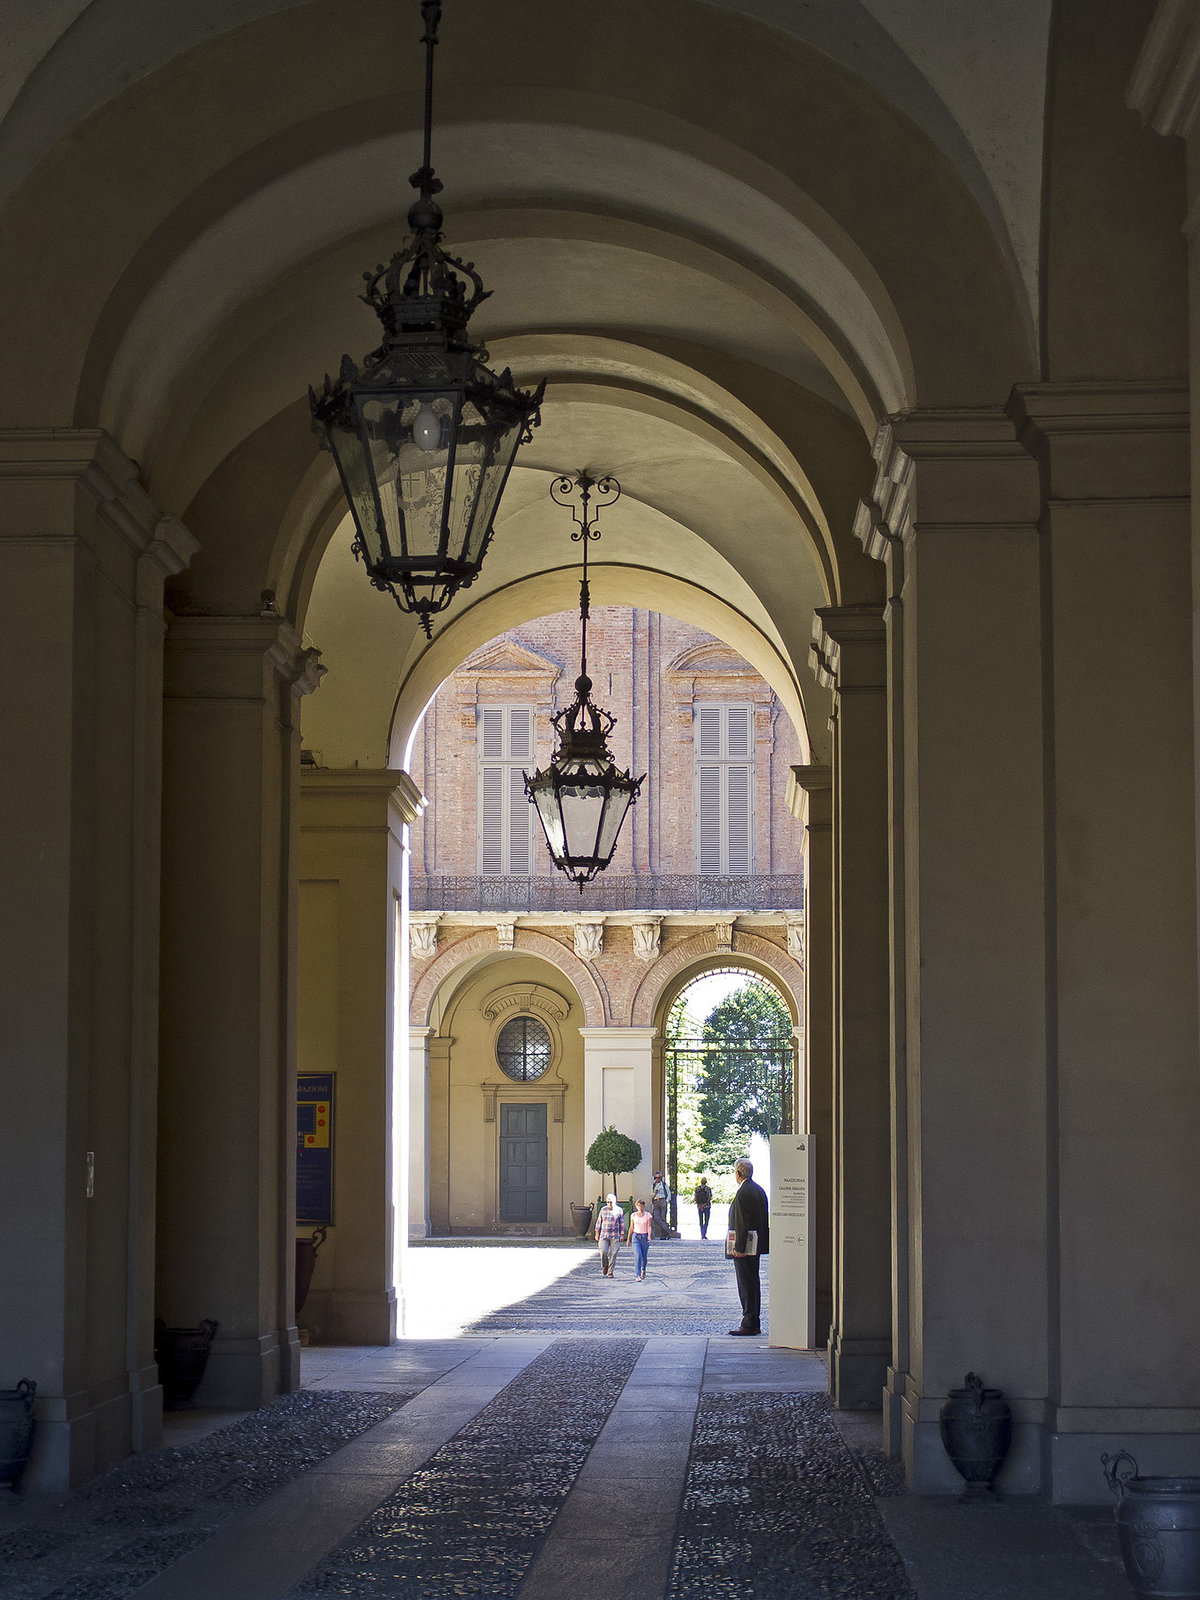 Turin, entrance to Royal Palace and the Gardens